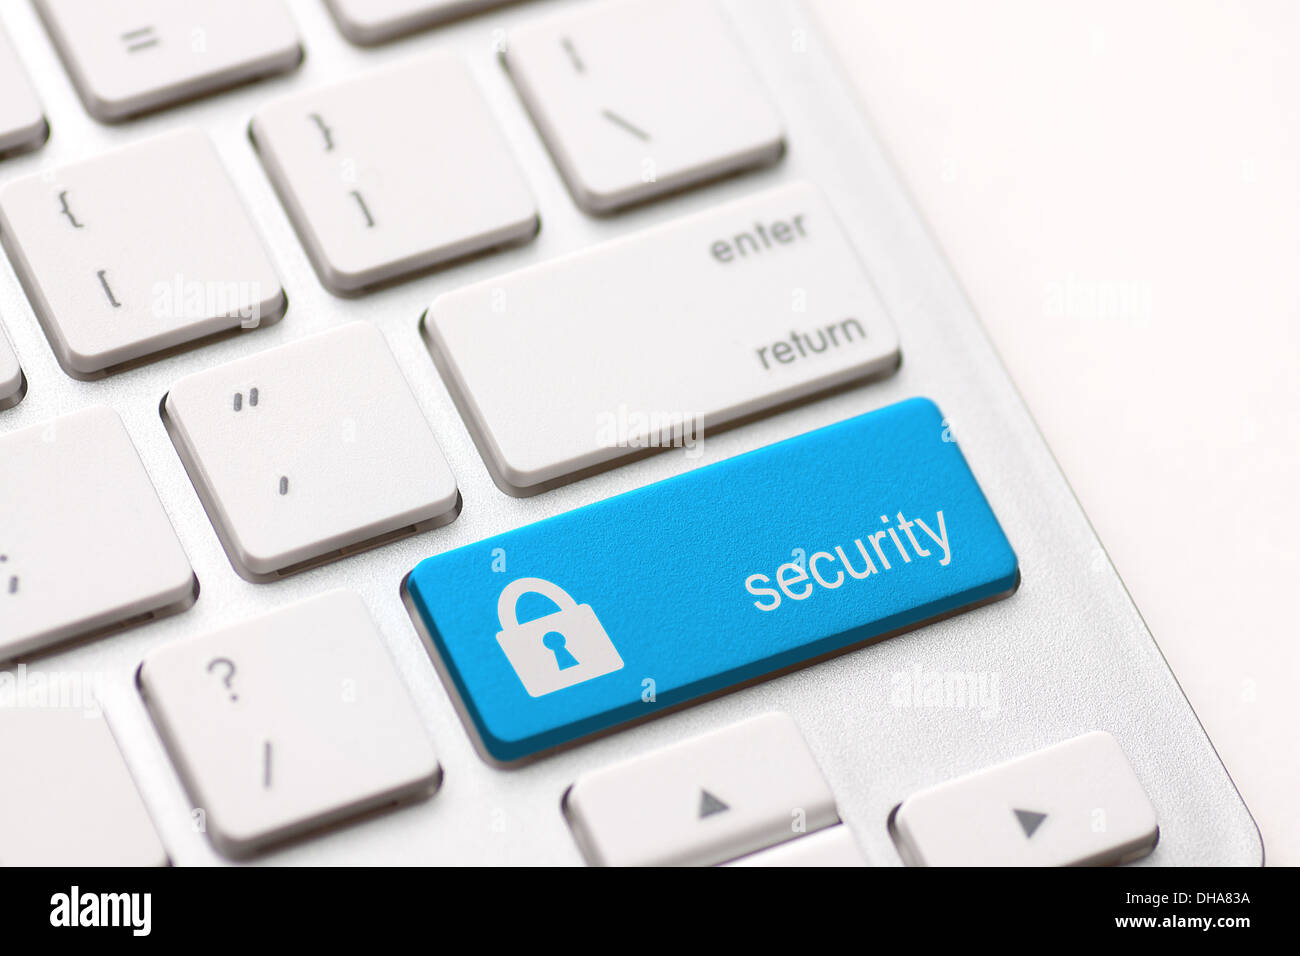 security button on the keyboard Stock Photo